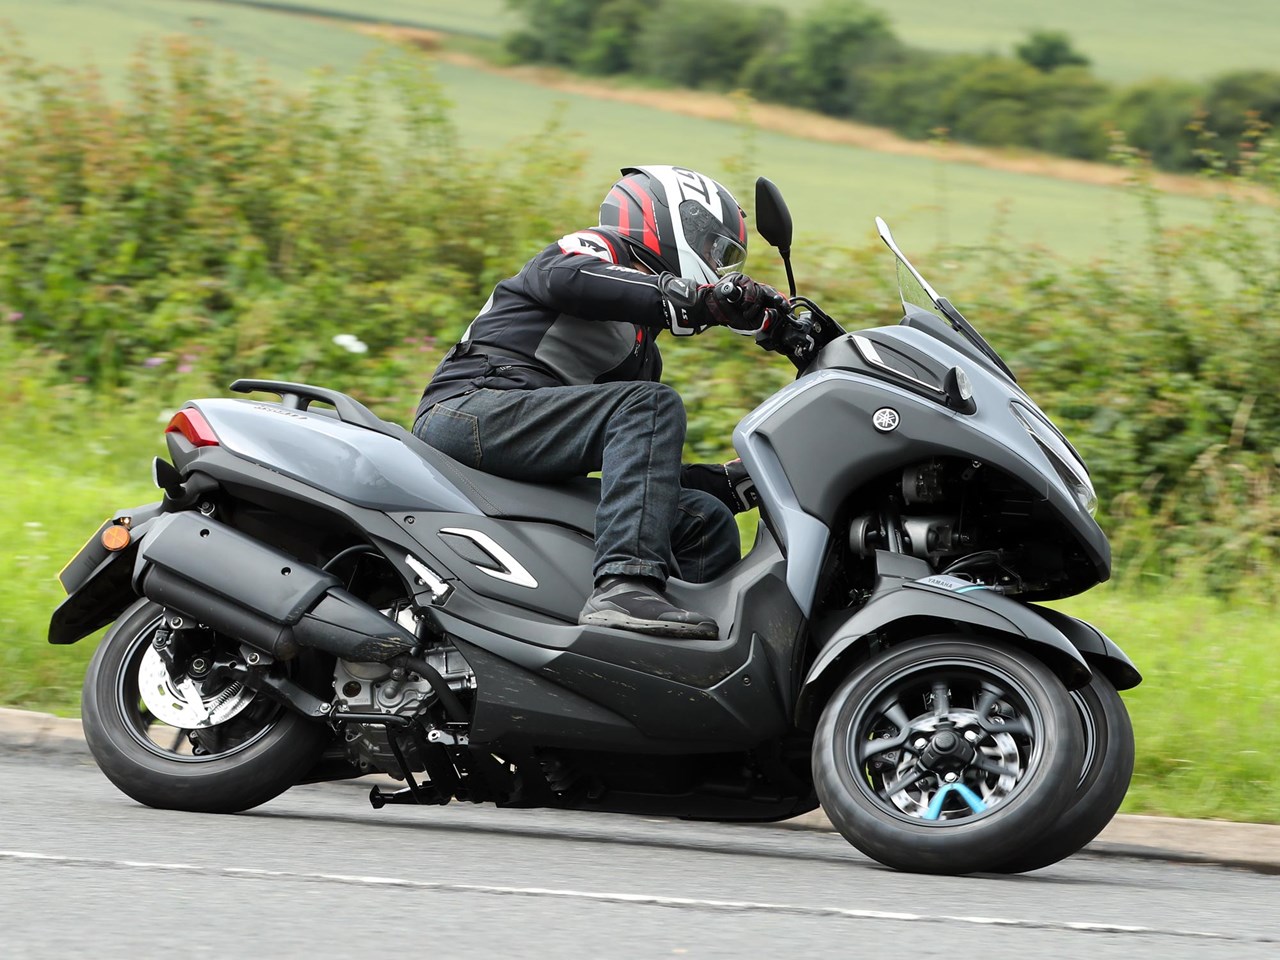 Yamaha Tricity 300 (2020-on) Review